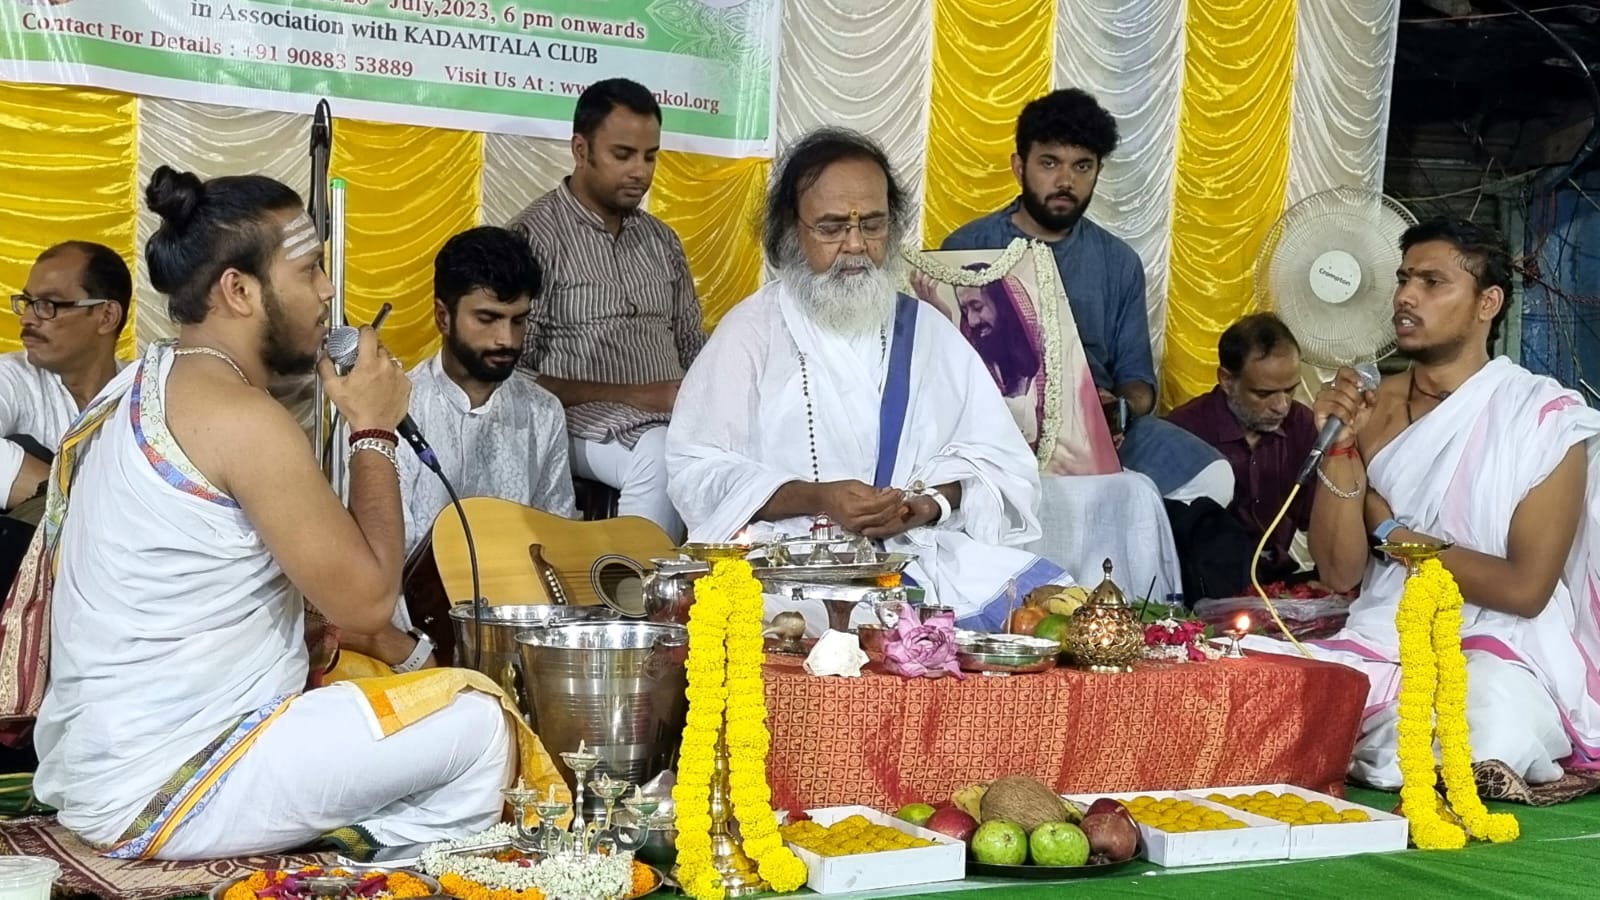 On July 26, 2023, a significant event took place in Sonagachi, Kolkata, where a special Rudra Puja was conducted by Revered Swami Shraddhananda Ji, followed by an inspiring Satsang led by Sri Vikas Pasari.